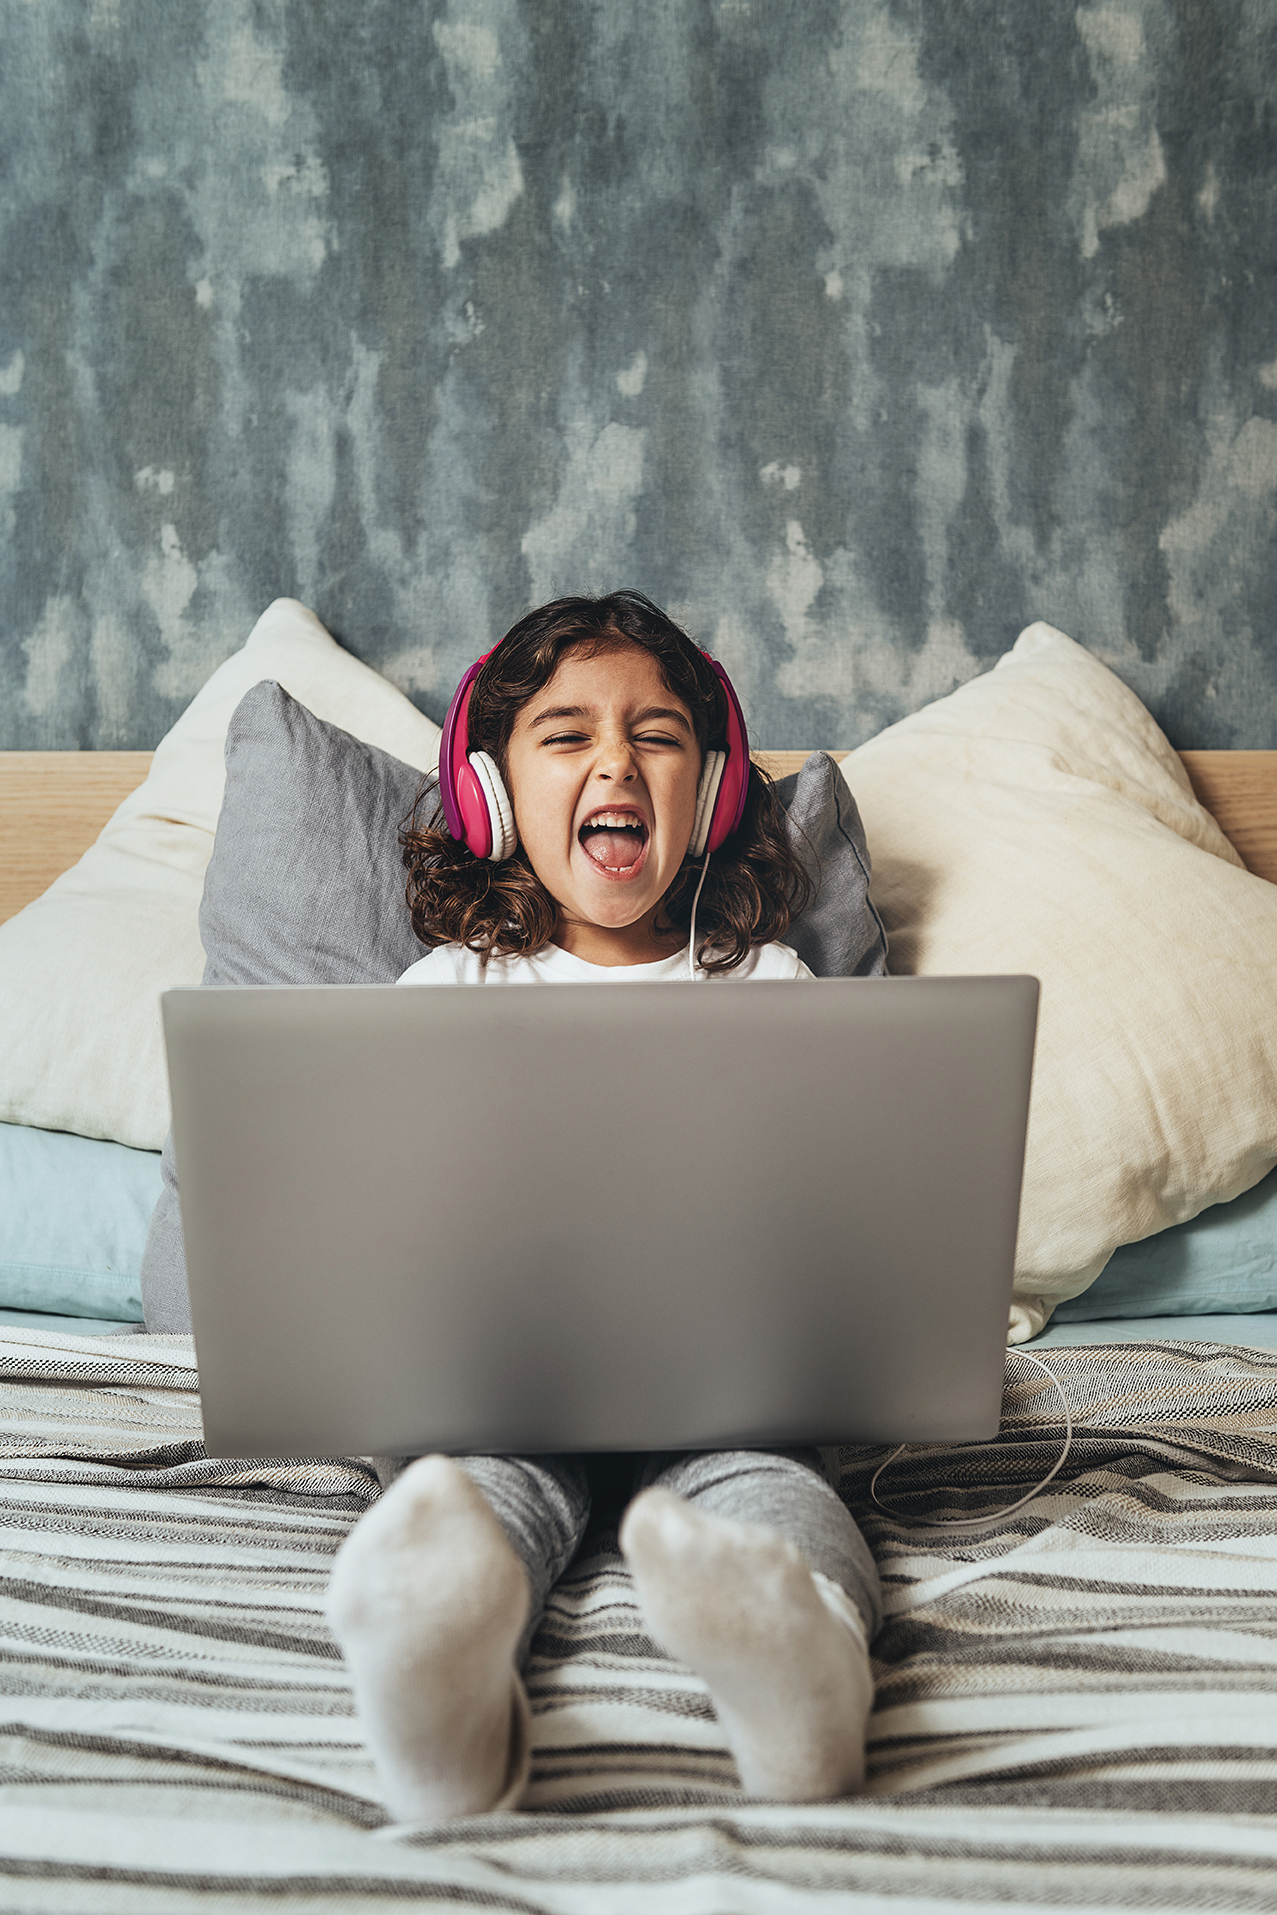 "Little girl watching tv on a laptop, laughing and wearing pink headphones"